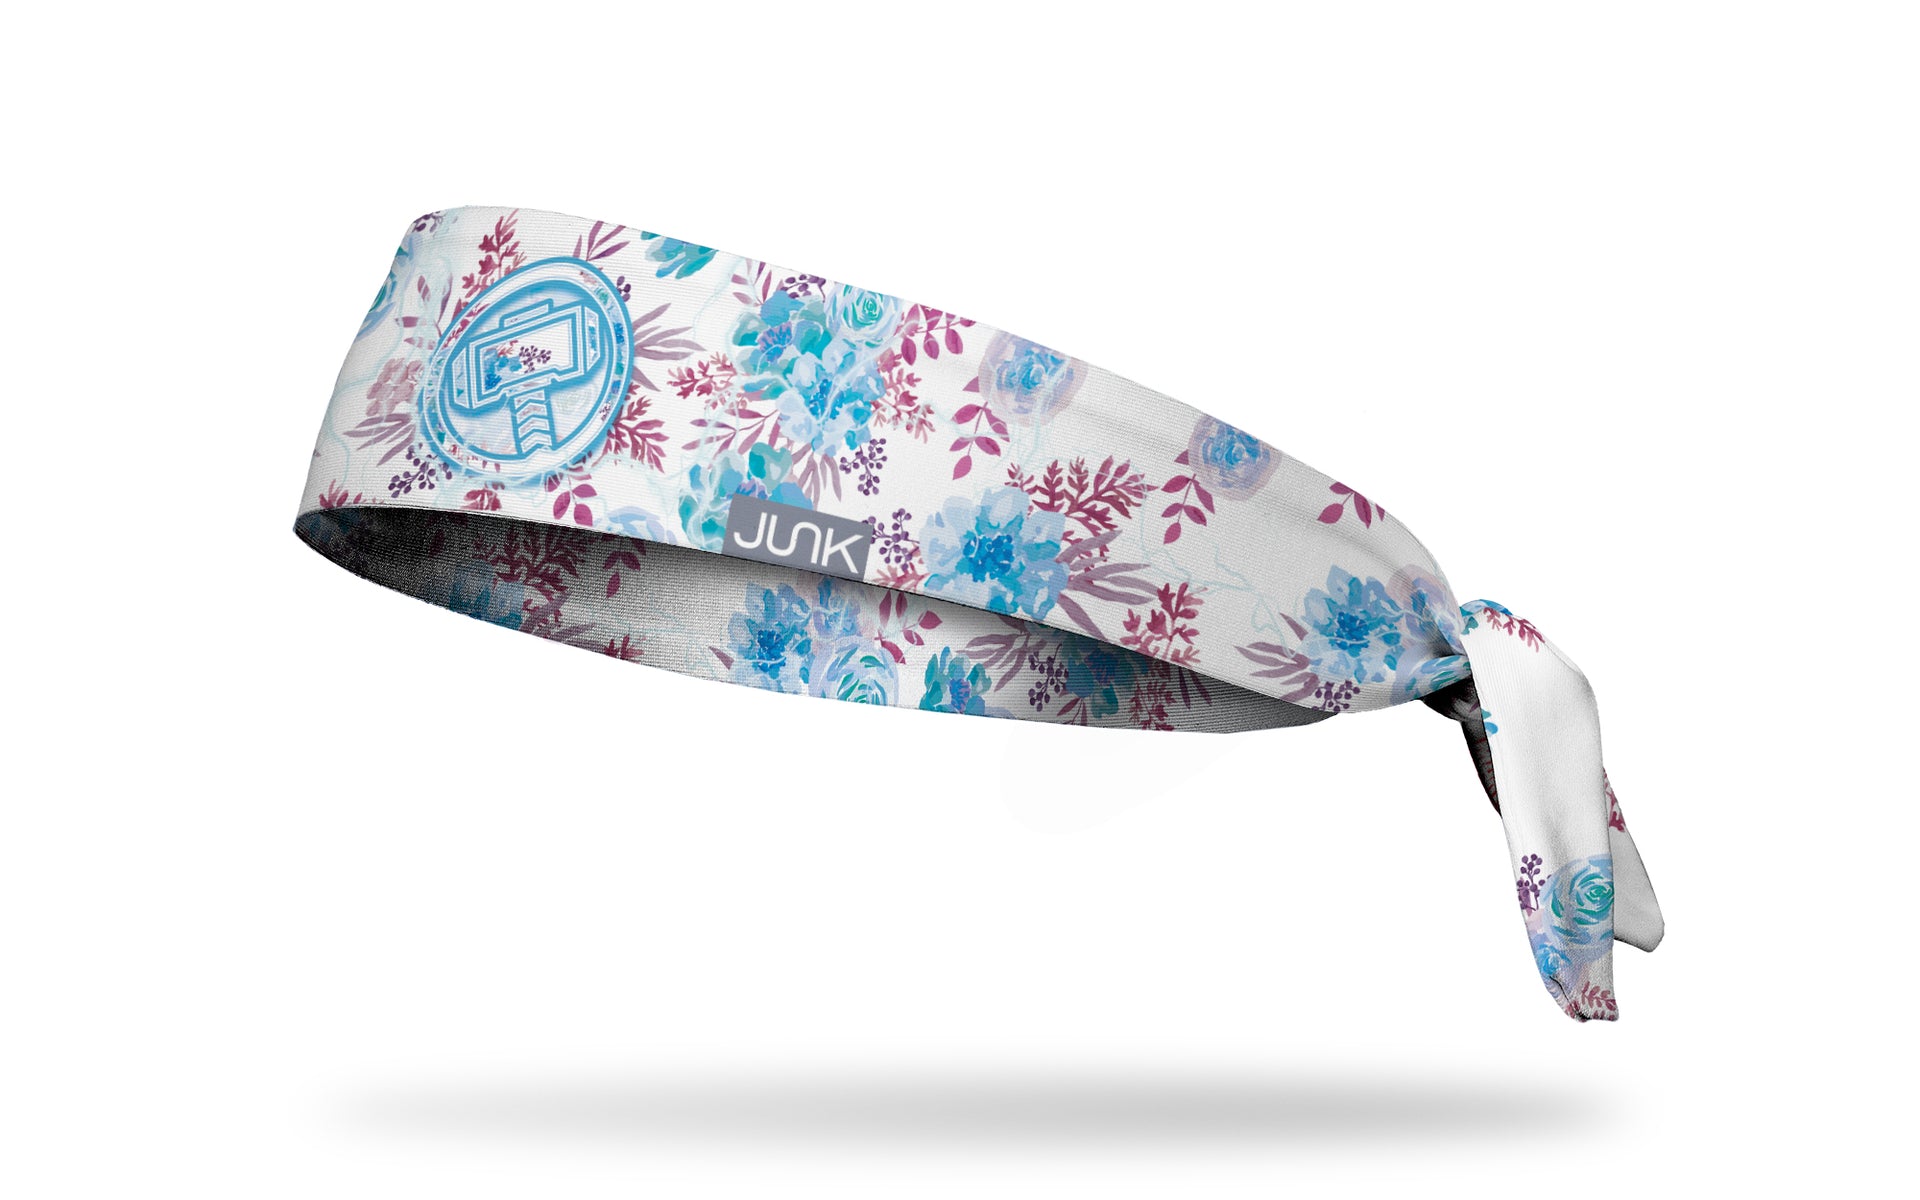 Thor: Floral Tie Headband - View 1